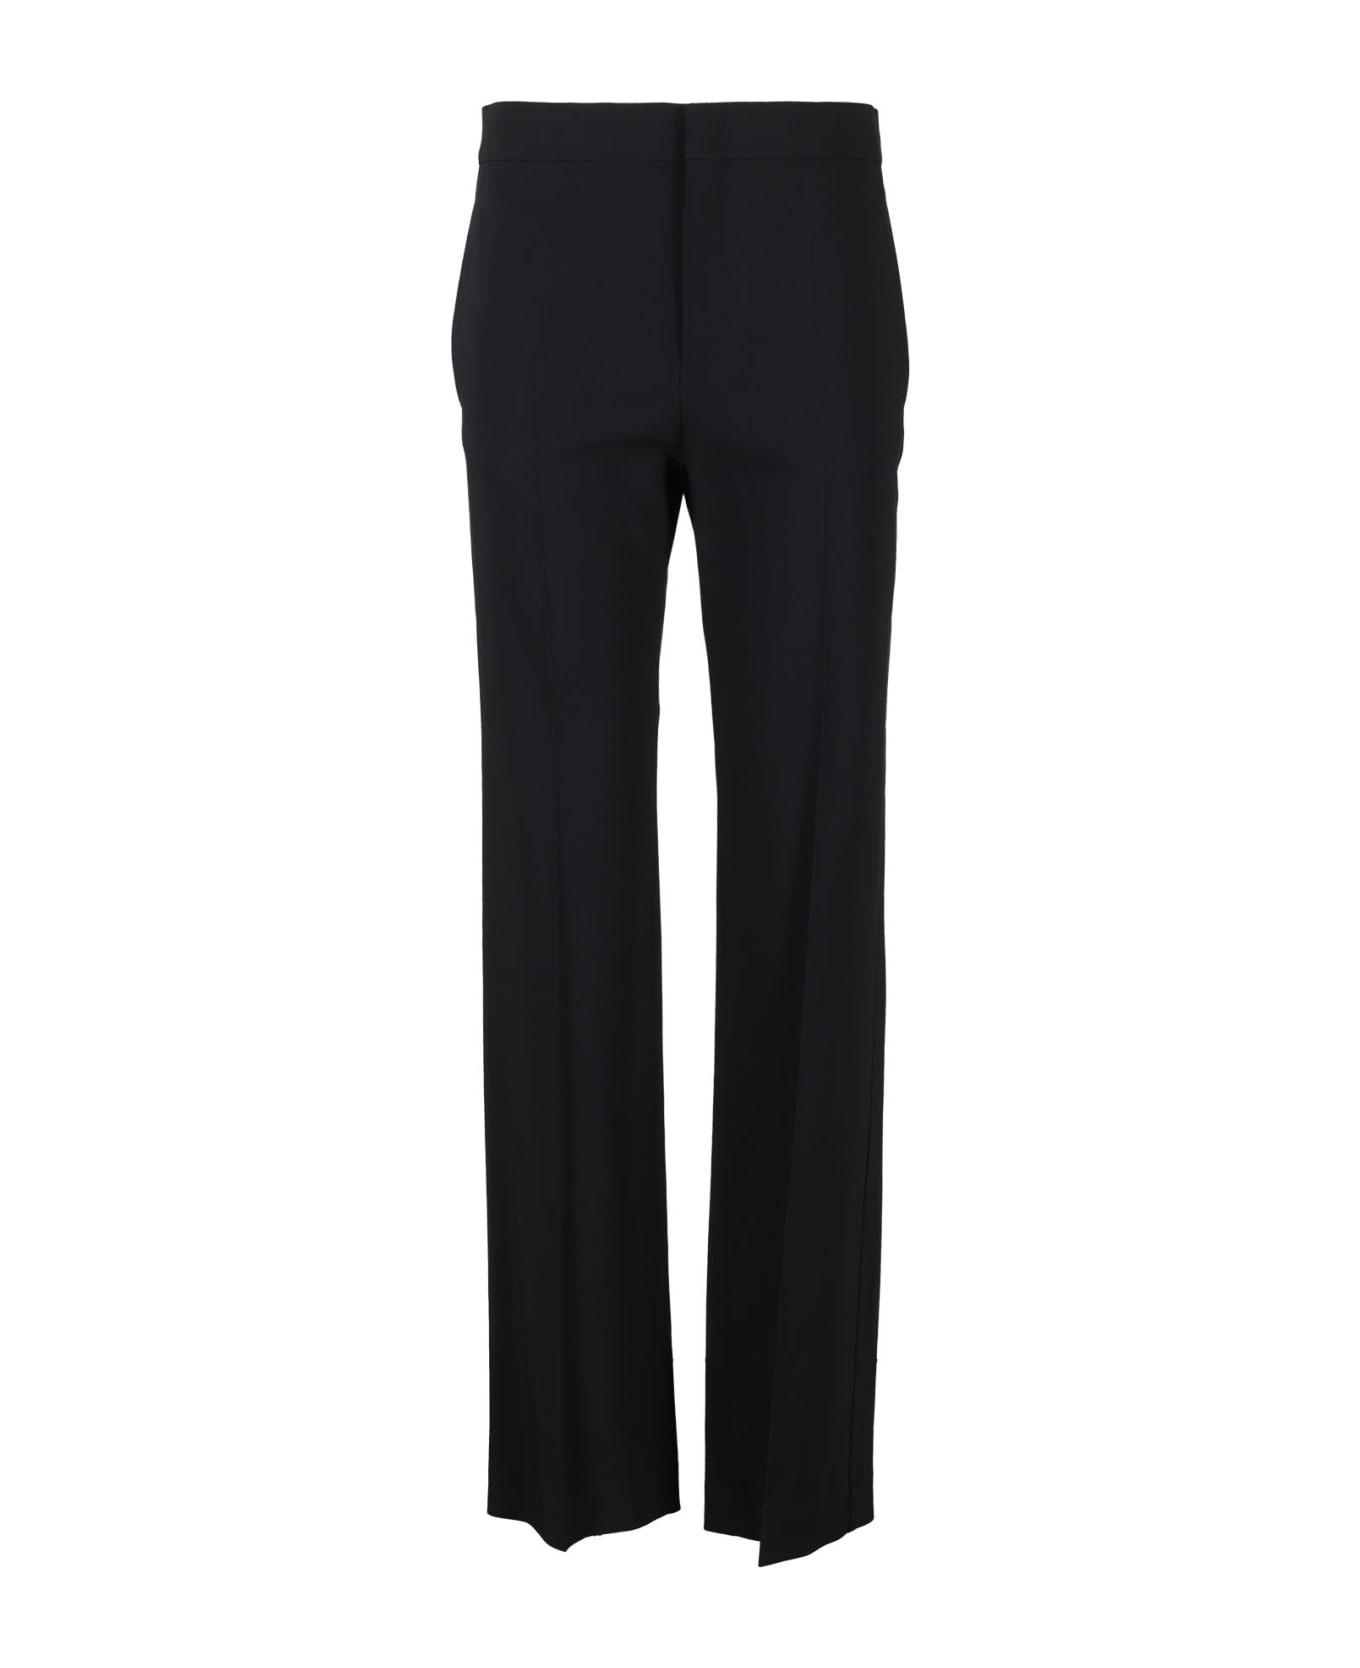 Isabel Marant Low-waisted Loose Fit Pants - Bk